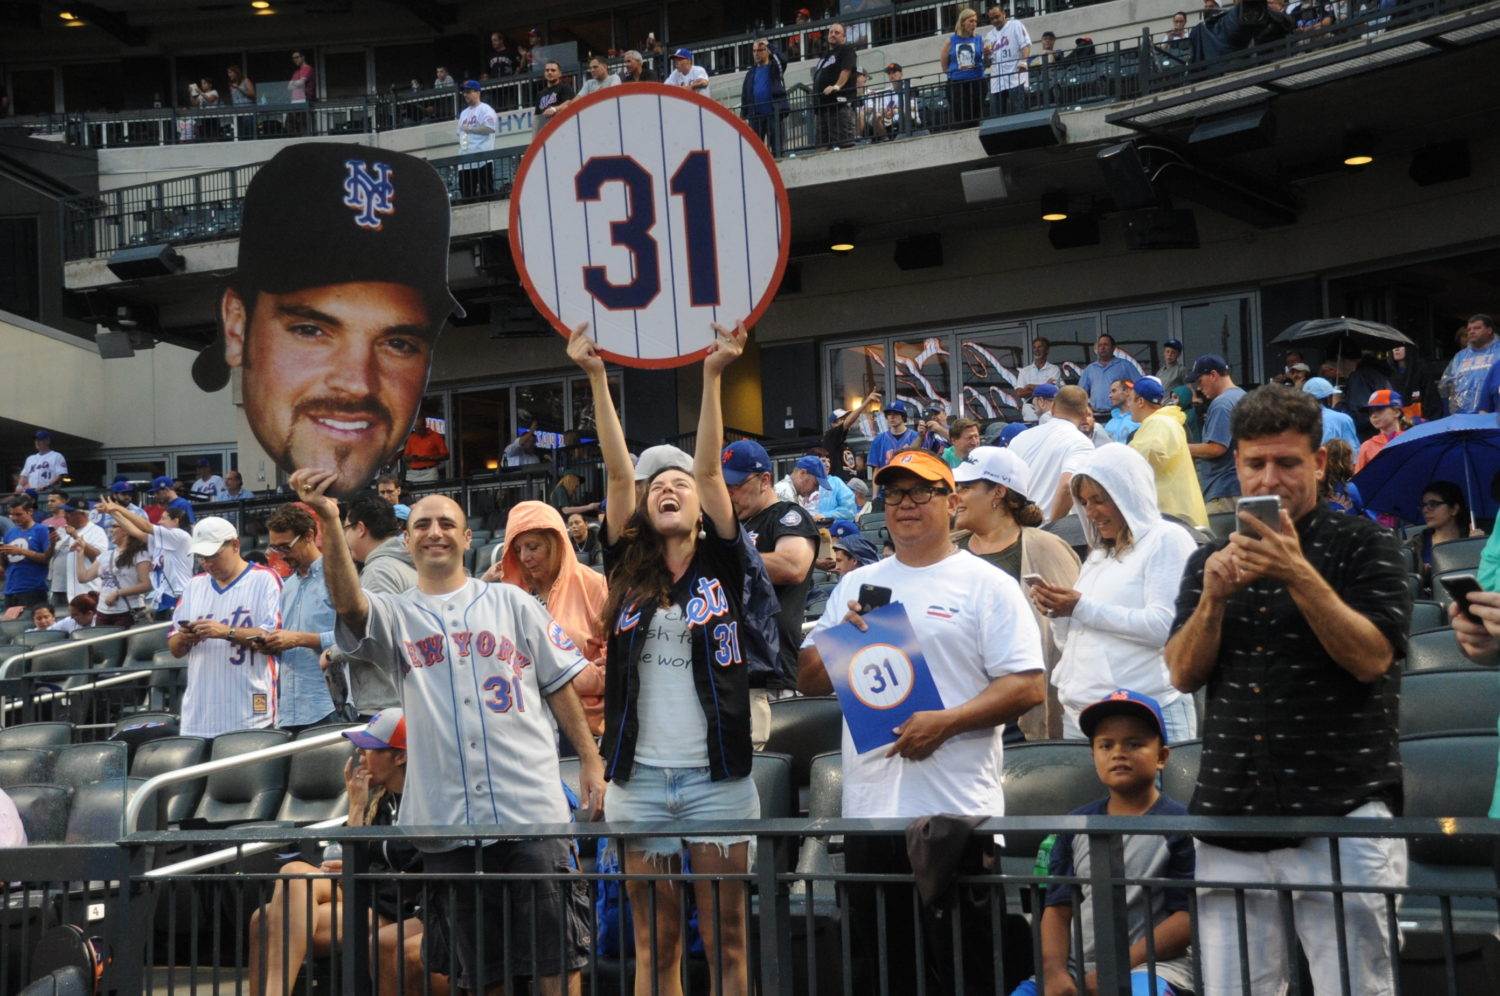 Fans Show Love For Mike Piazza During Number Retirement Ceremony